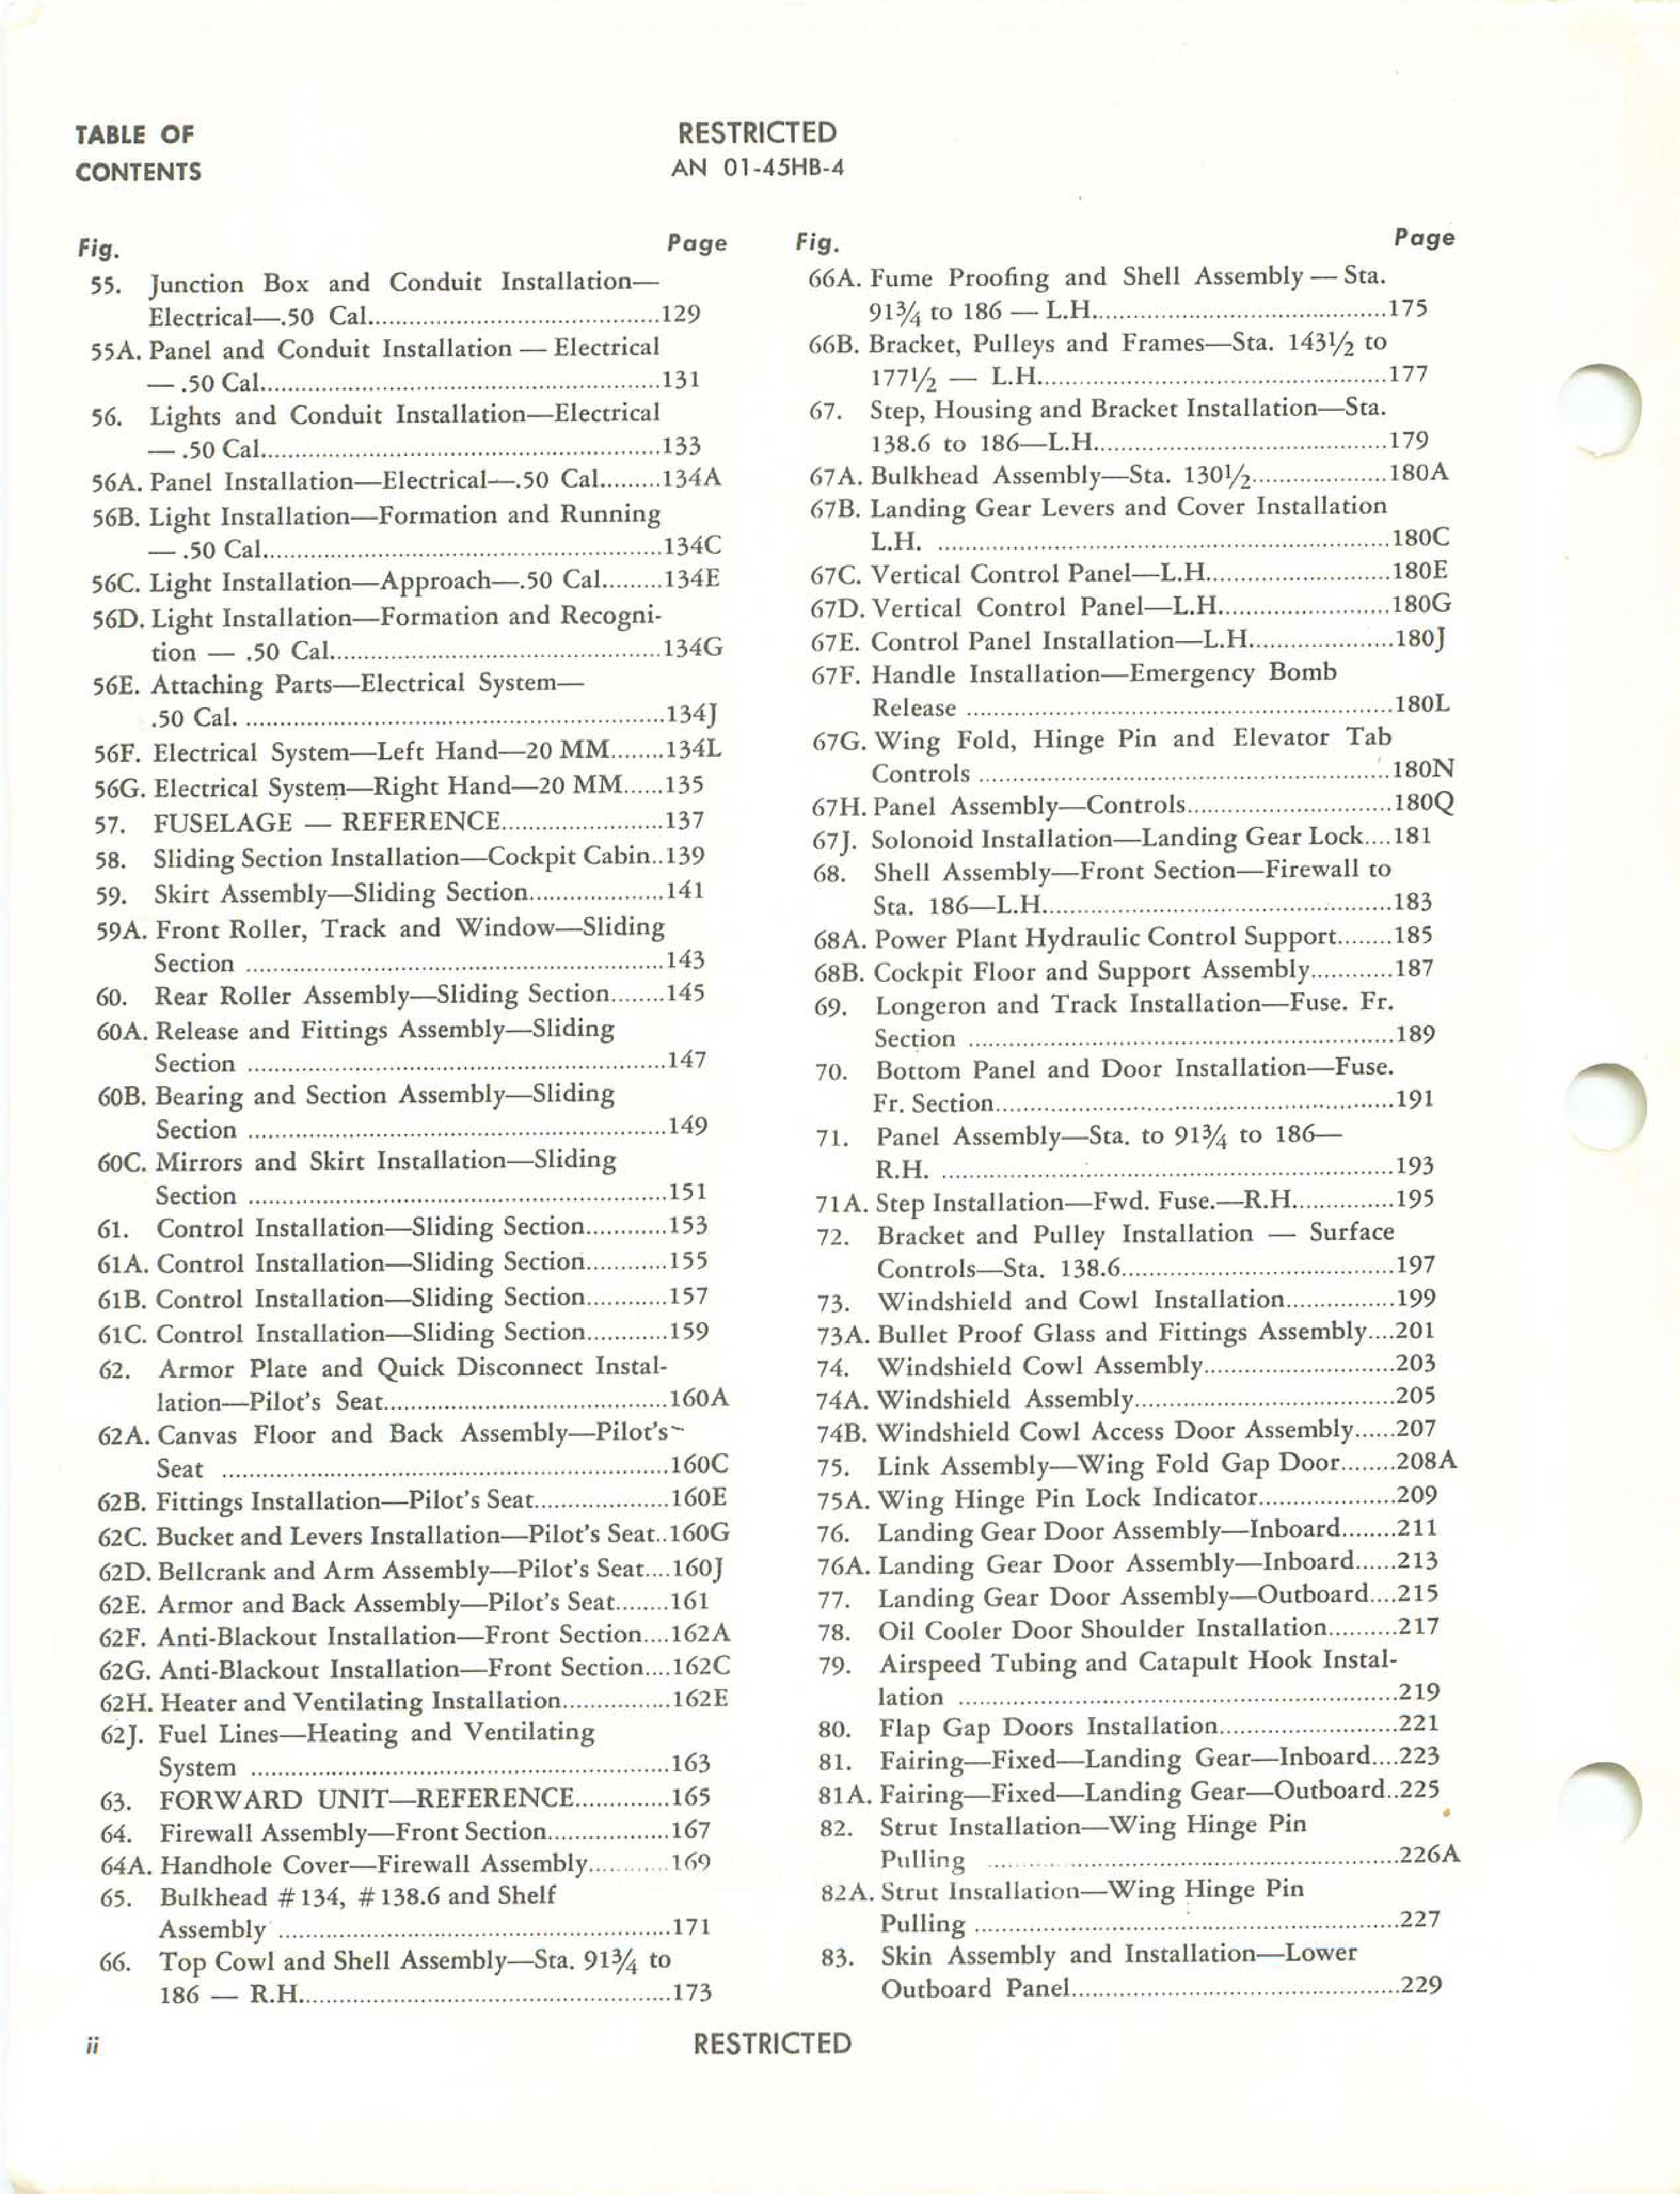 Sample page 4 from AirCorps Library document: Parts Catalog for F4U-4 and F4U-4B Airplanes